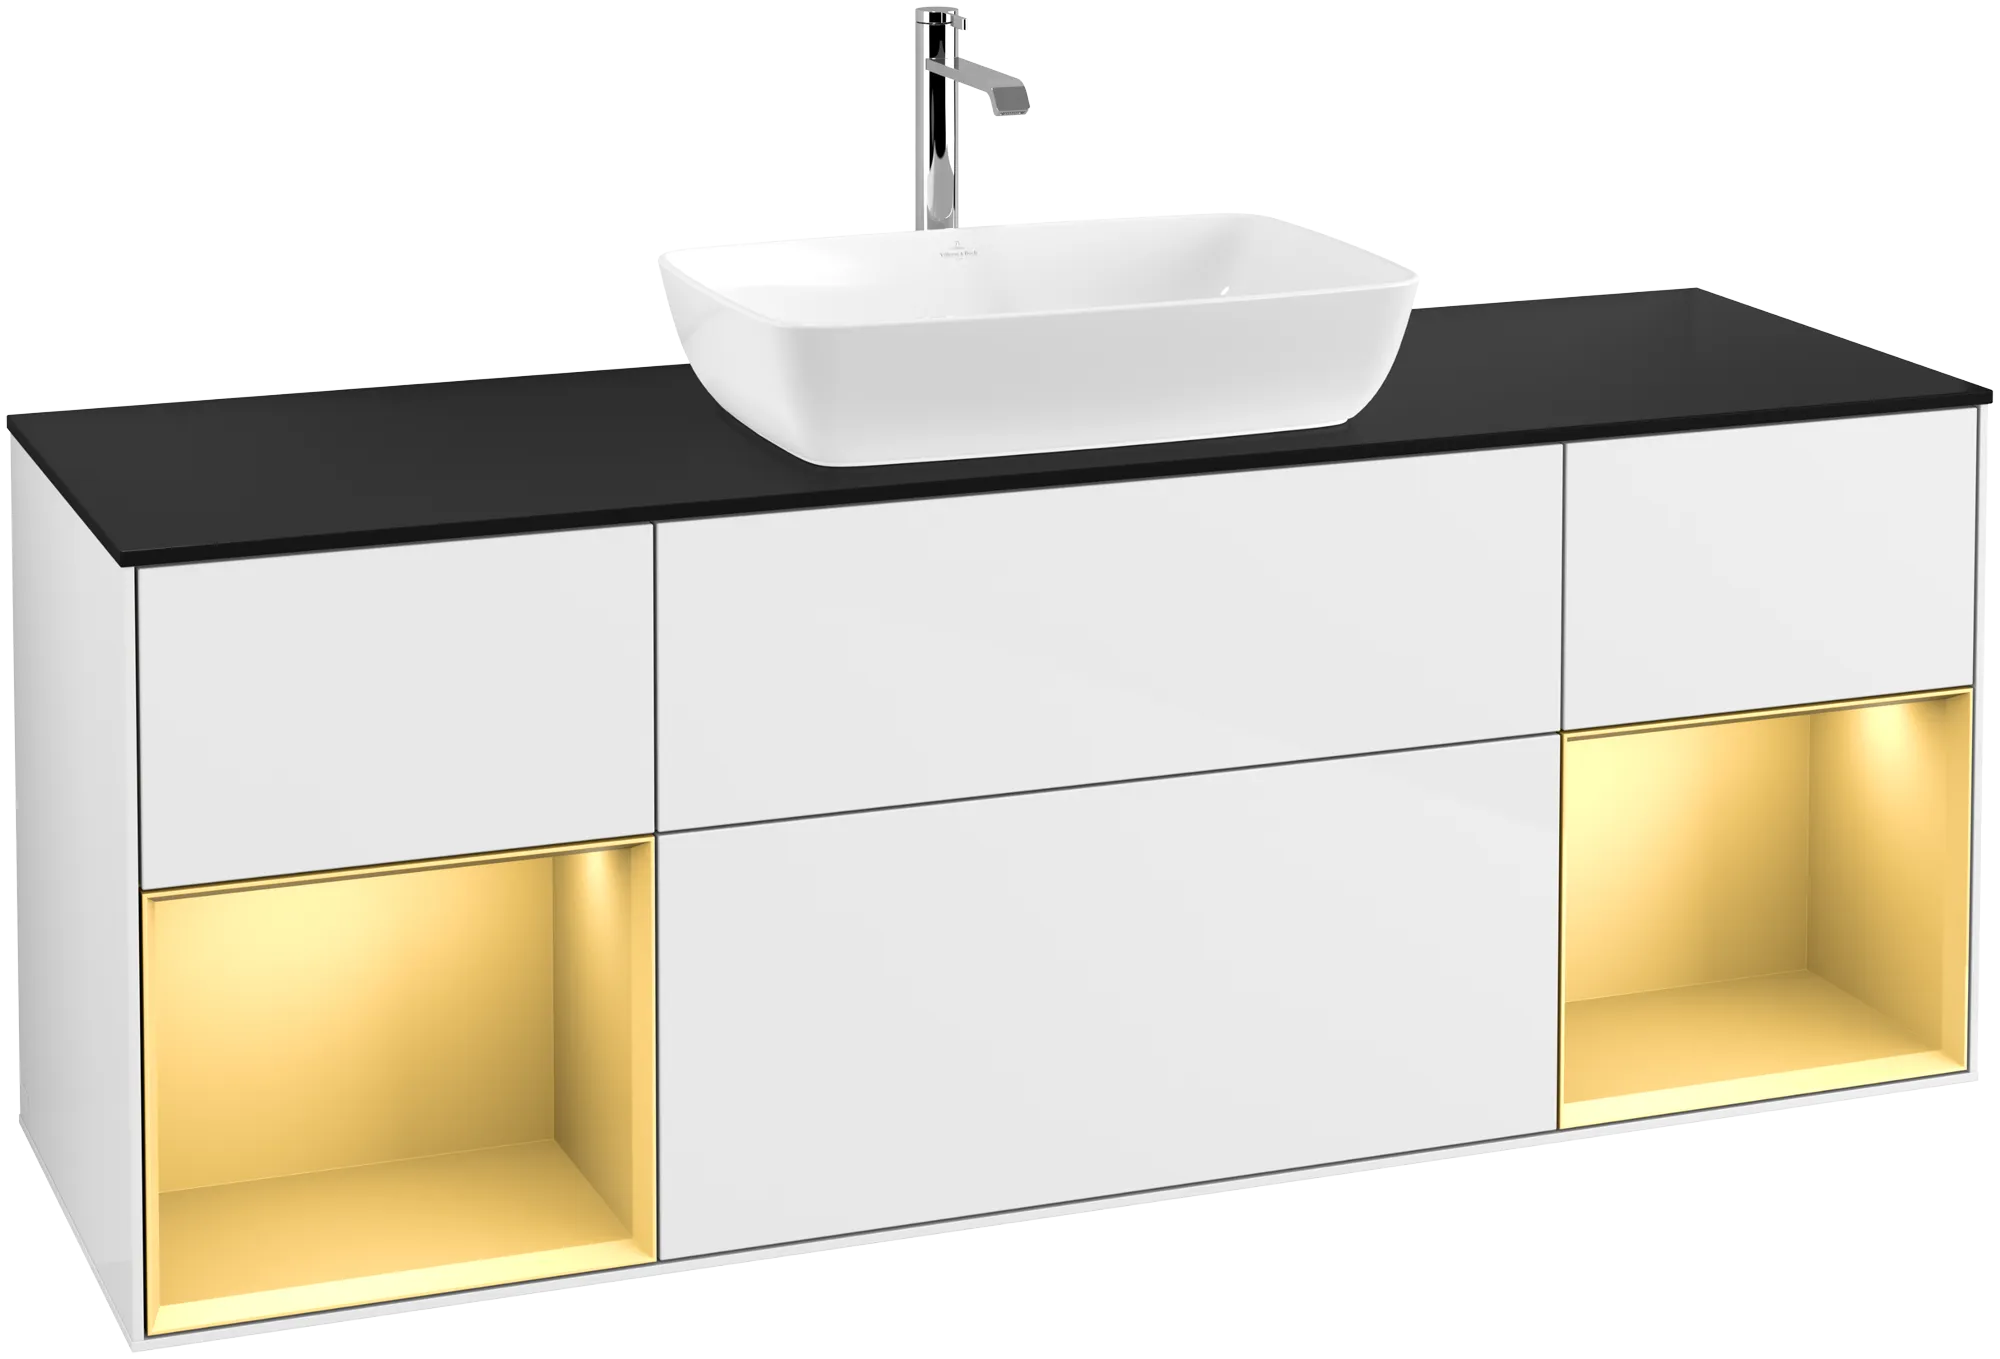 VILLEROY BOCH Finion Vanity unit, with lighting, 4 pull-out compartments, 1600 x 603 x 501 mm, Glossy White Lacquer / Gold Matt Lacquer / Glass Black Matt #G862HFGF resmi